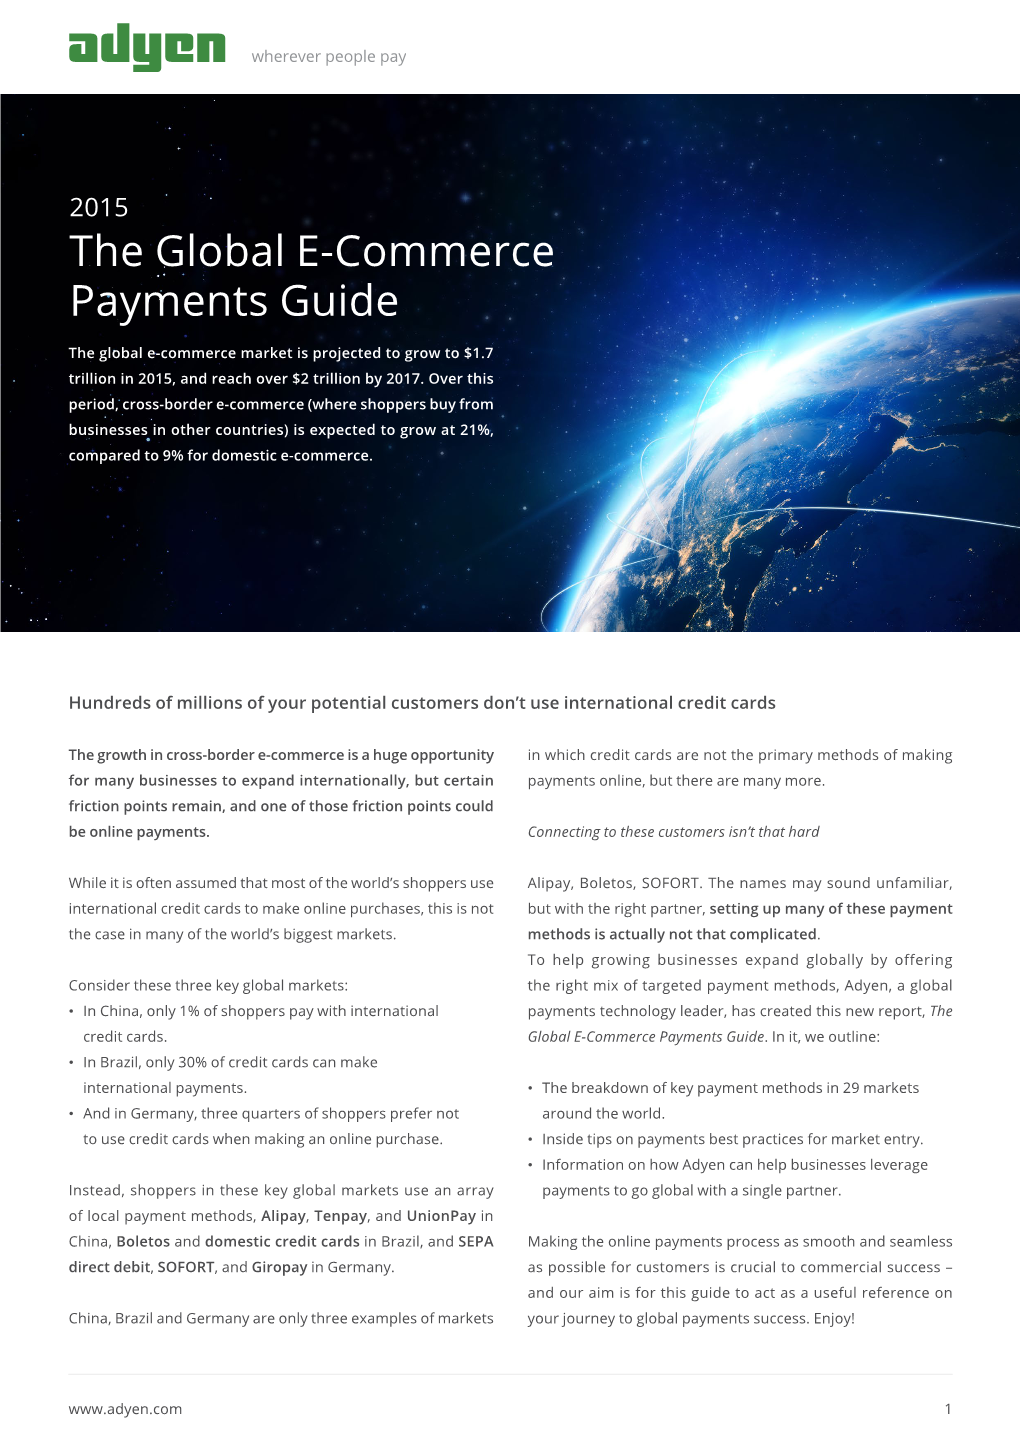 The Global E-Commerce Payments Guide